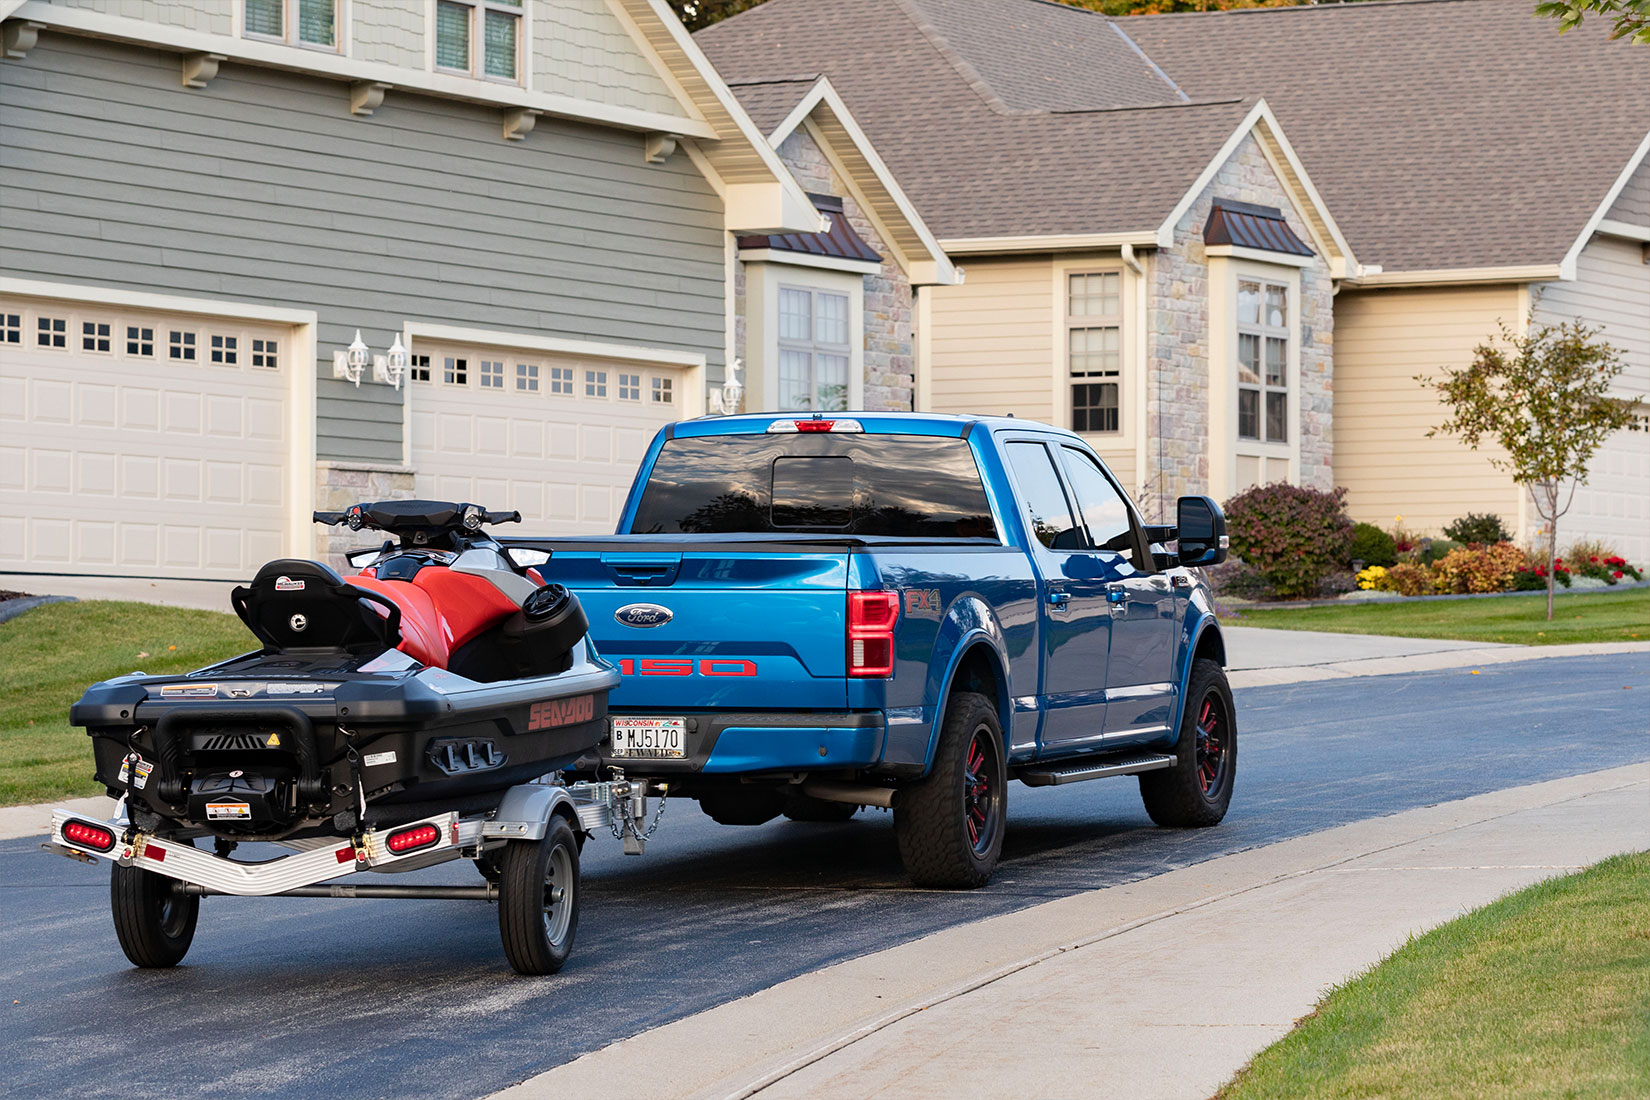 What to Look For in an Aluminum Personal Watercraft Trailer